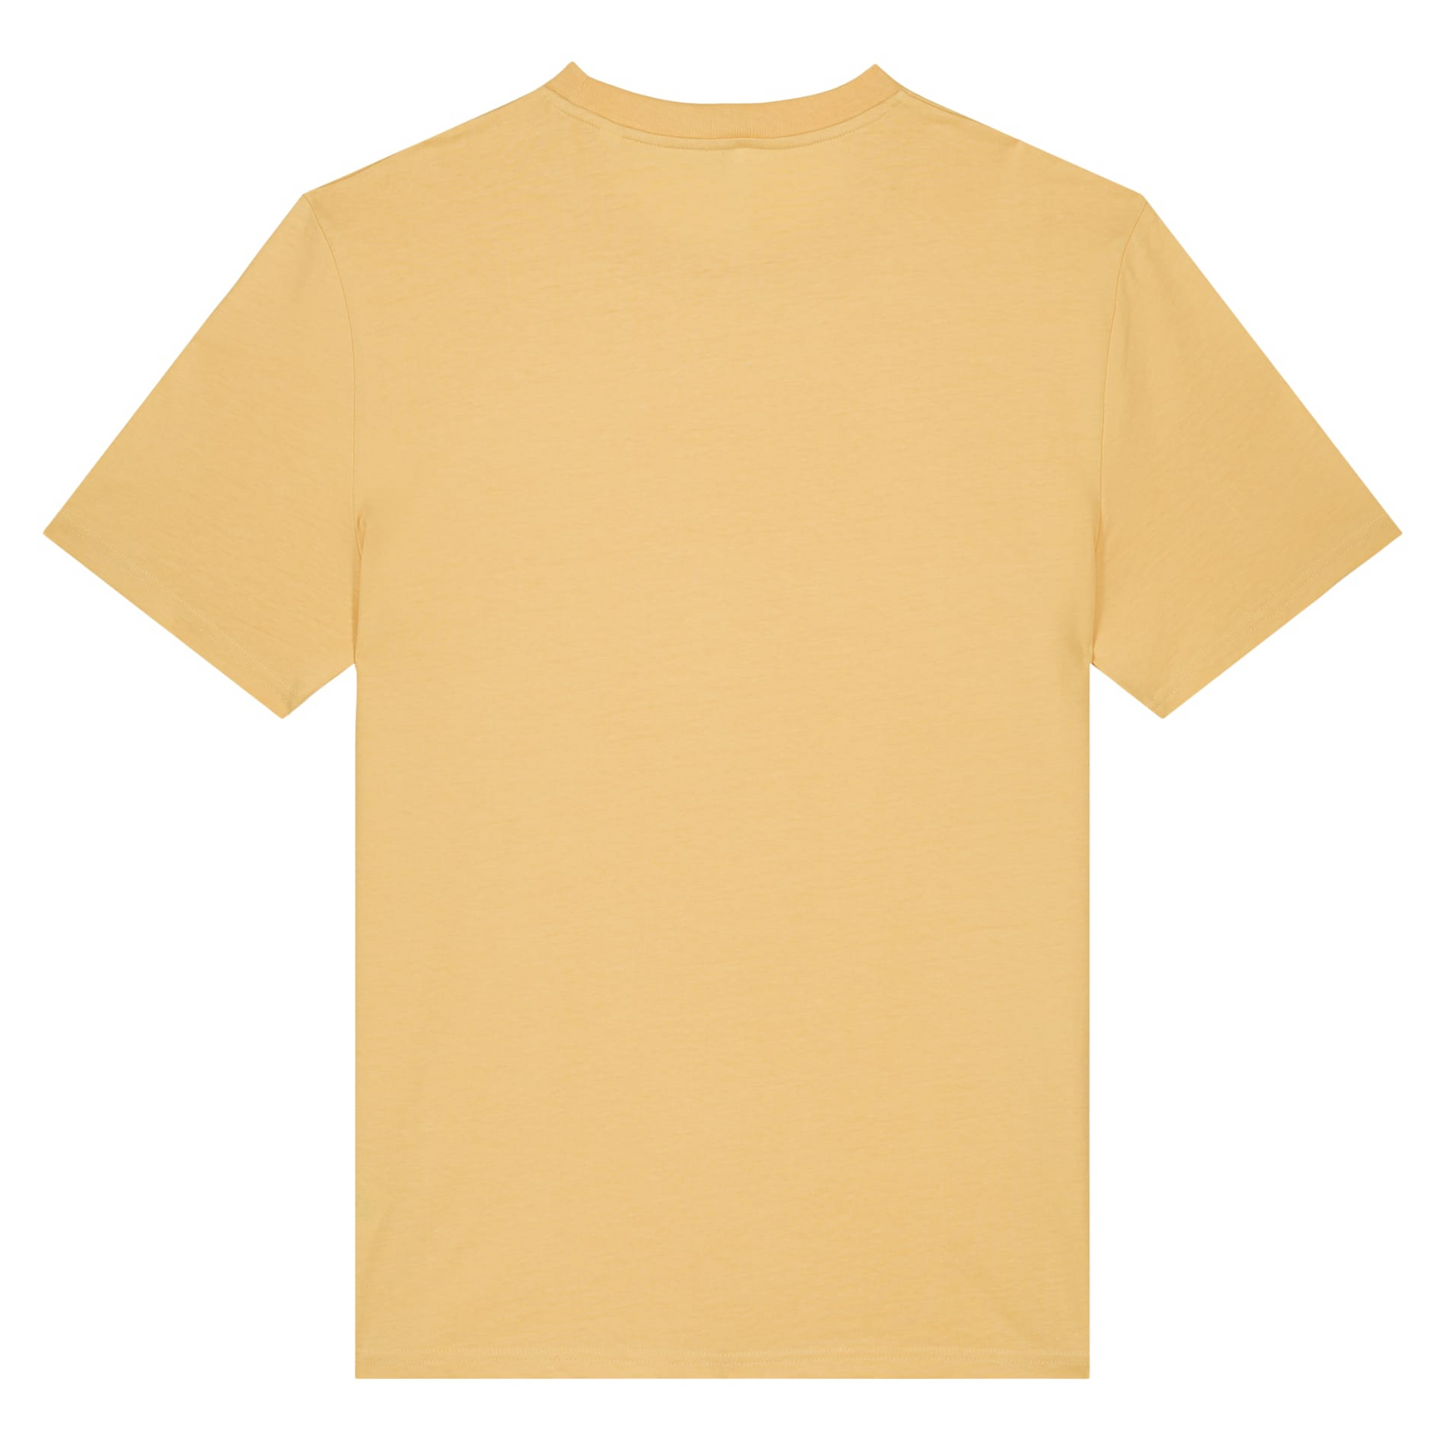 The back of a pale gold coloured t-shirt